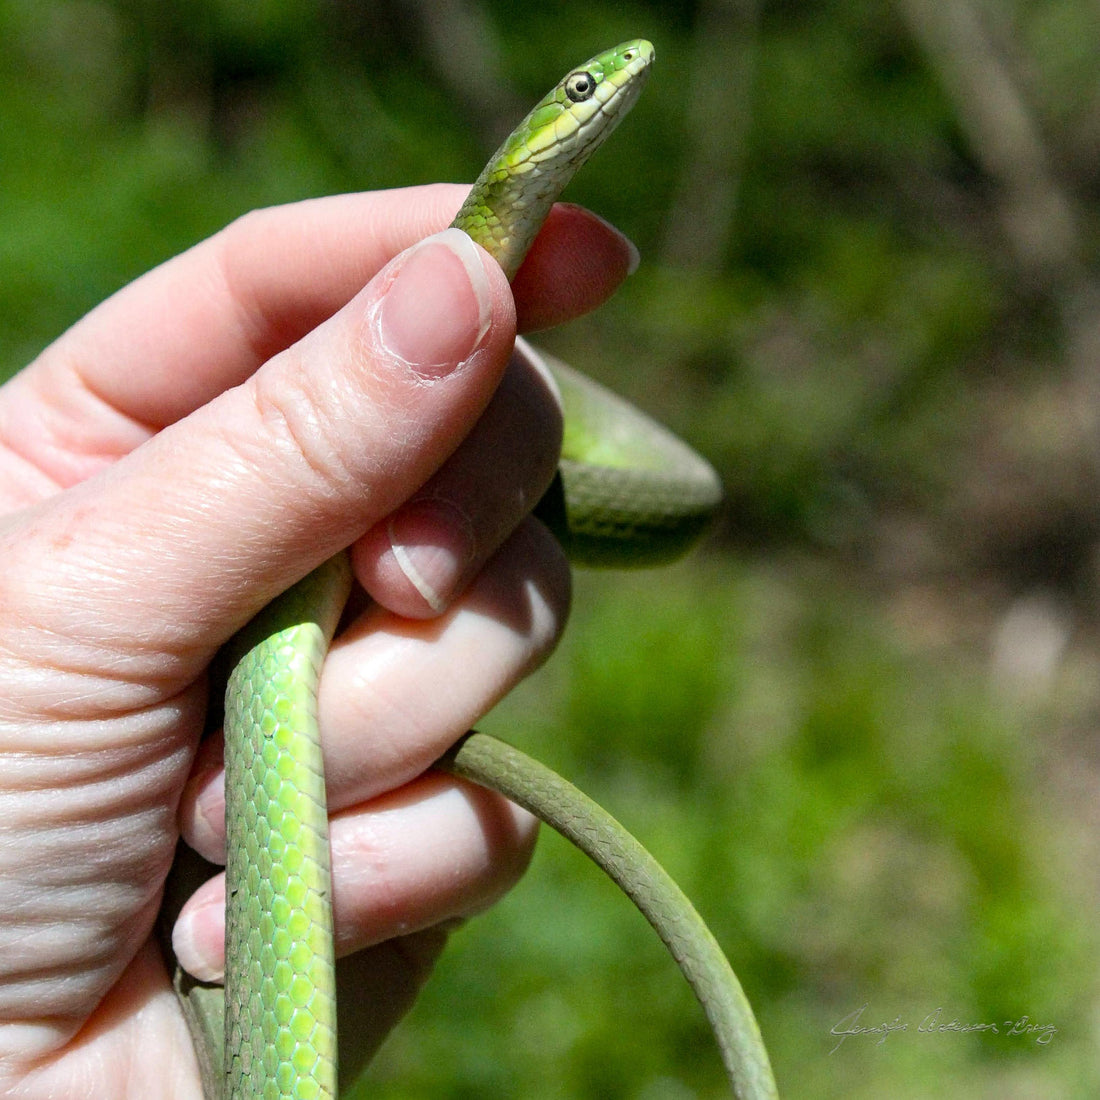 MWC Eco-brief: Green Snakes